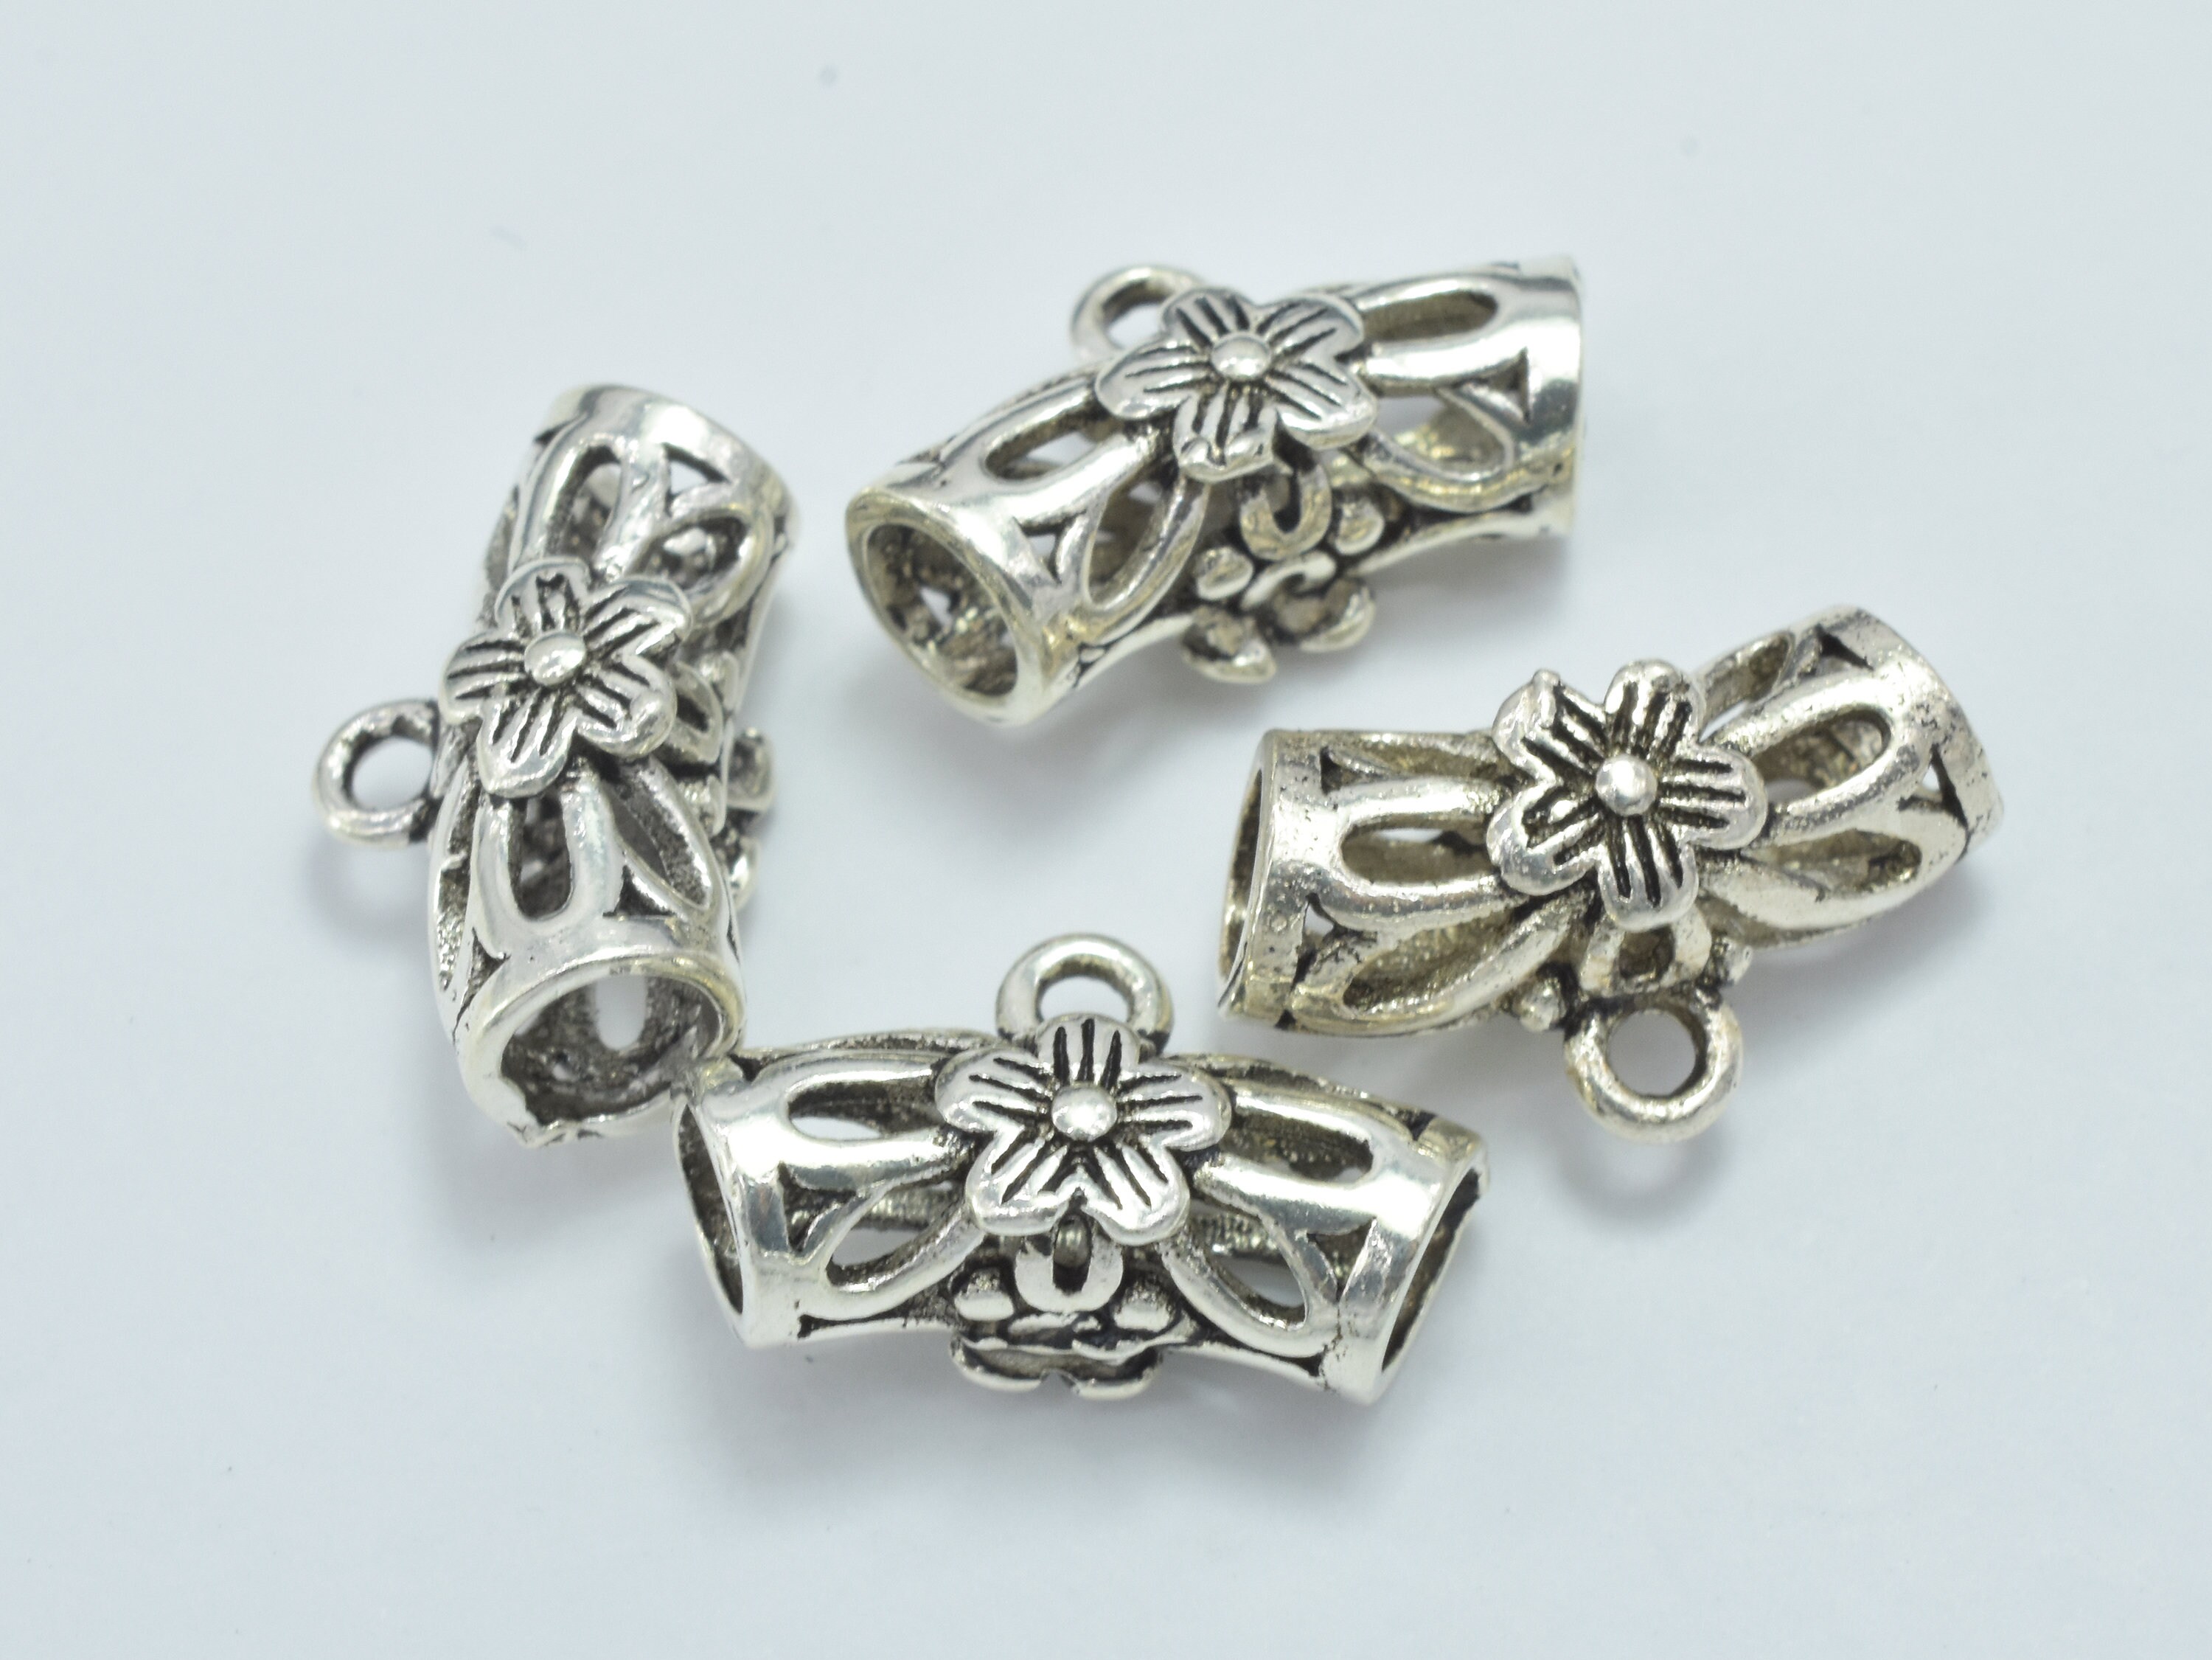 2pcs Round Filigree Jewelry Making Connector